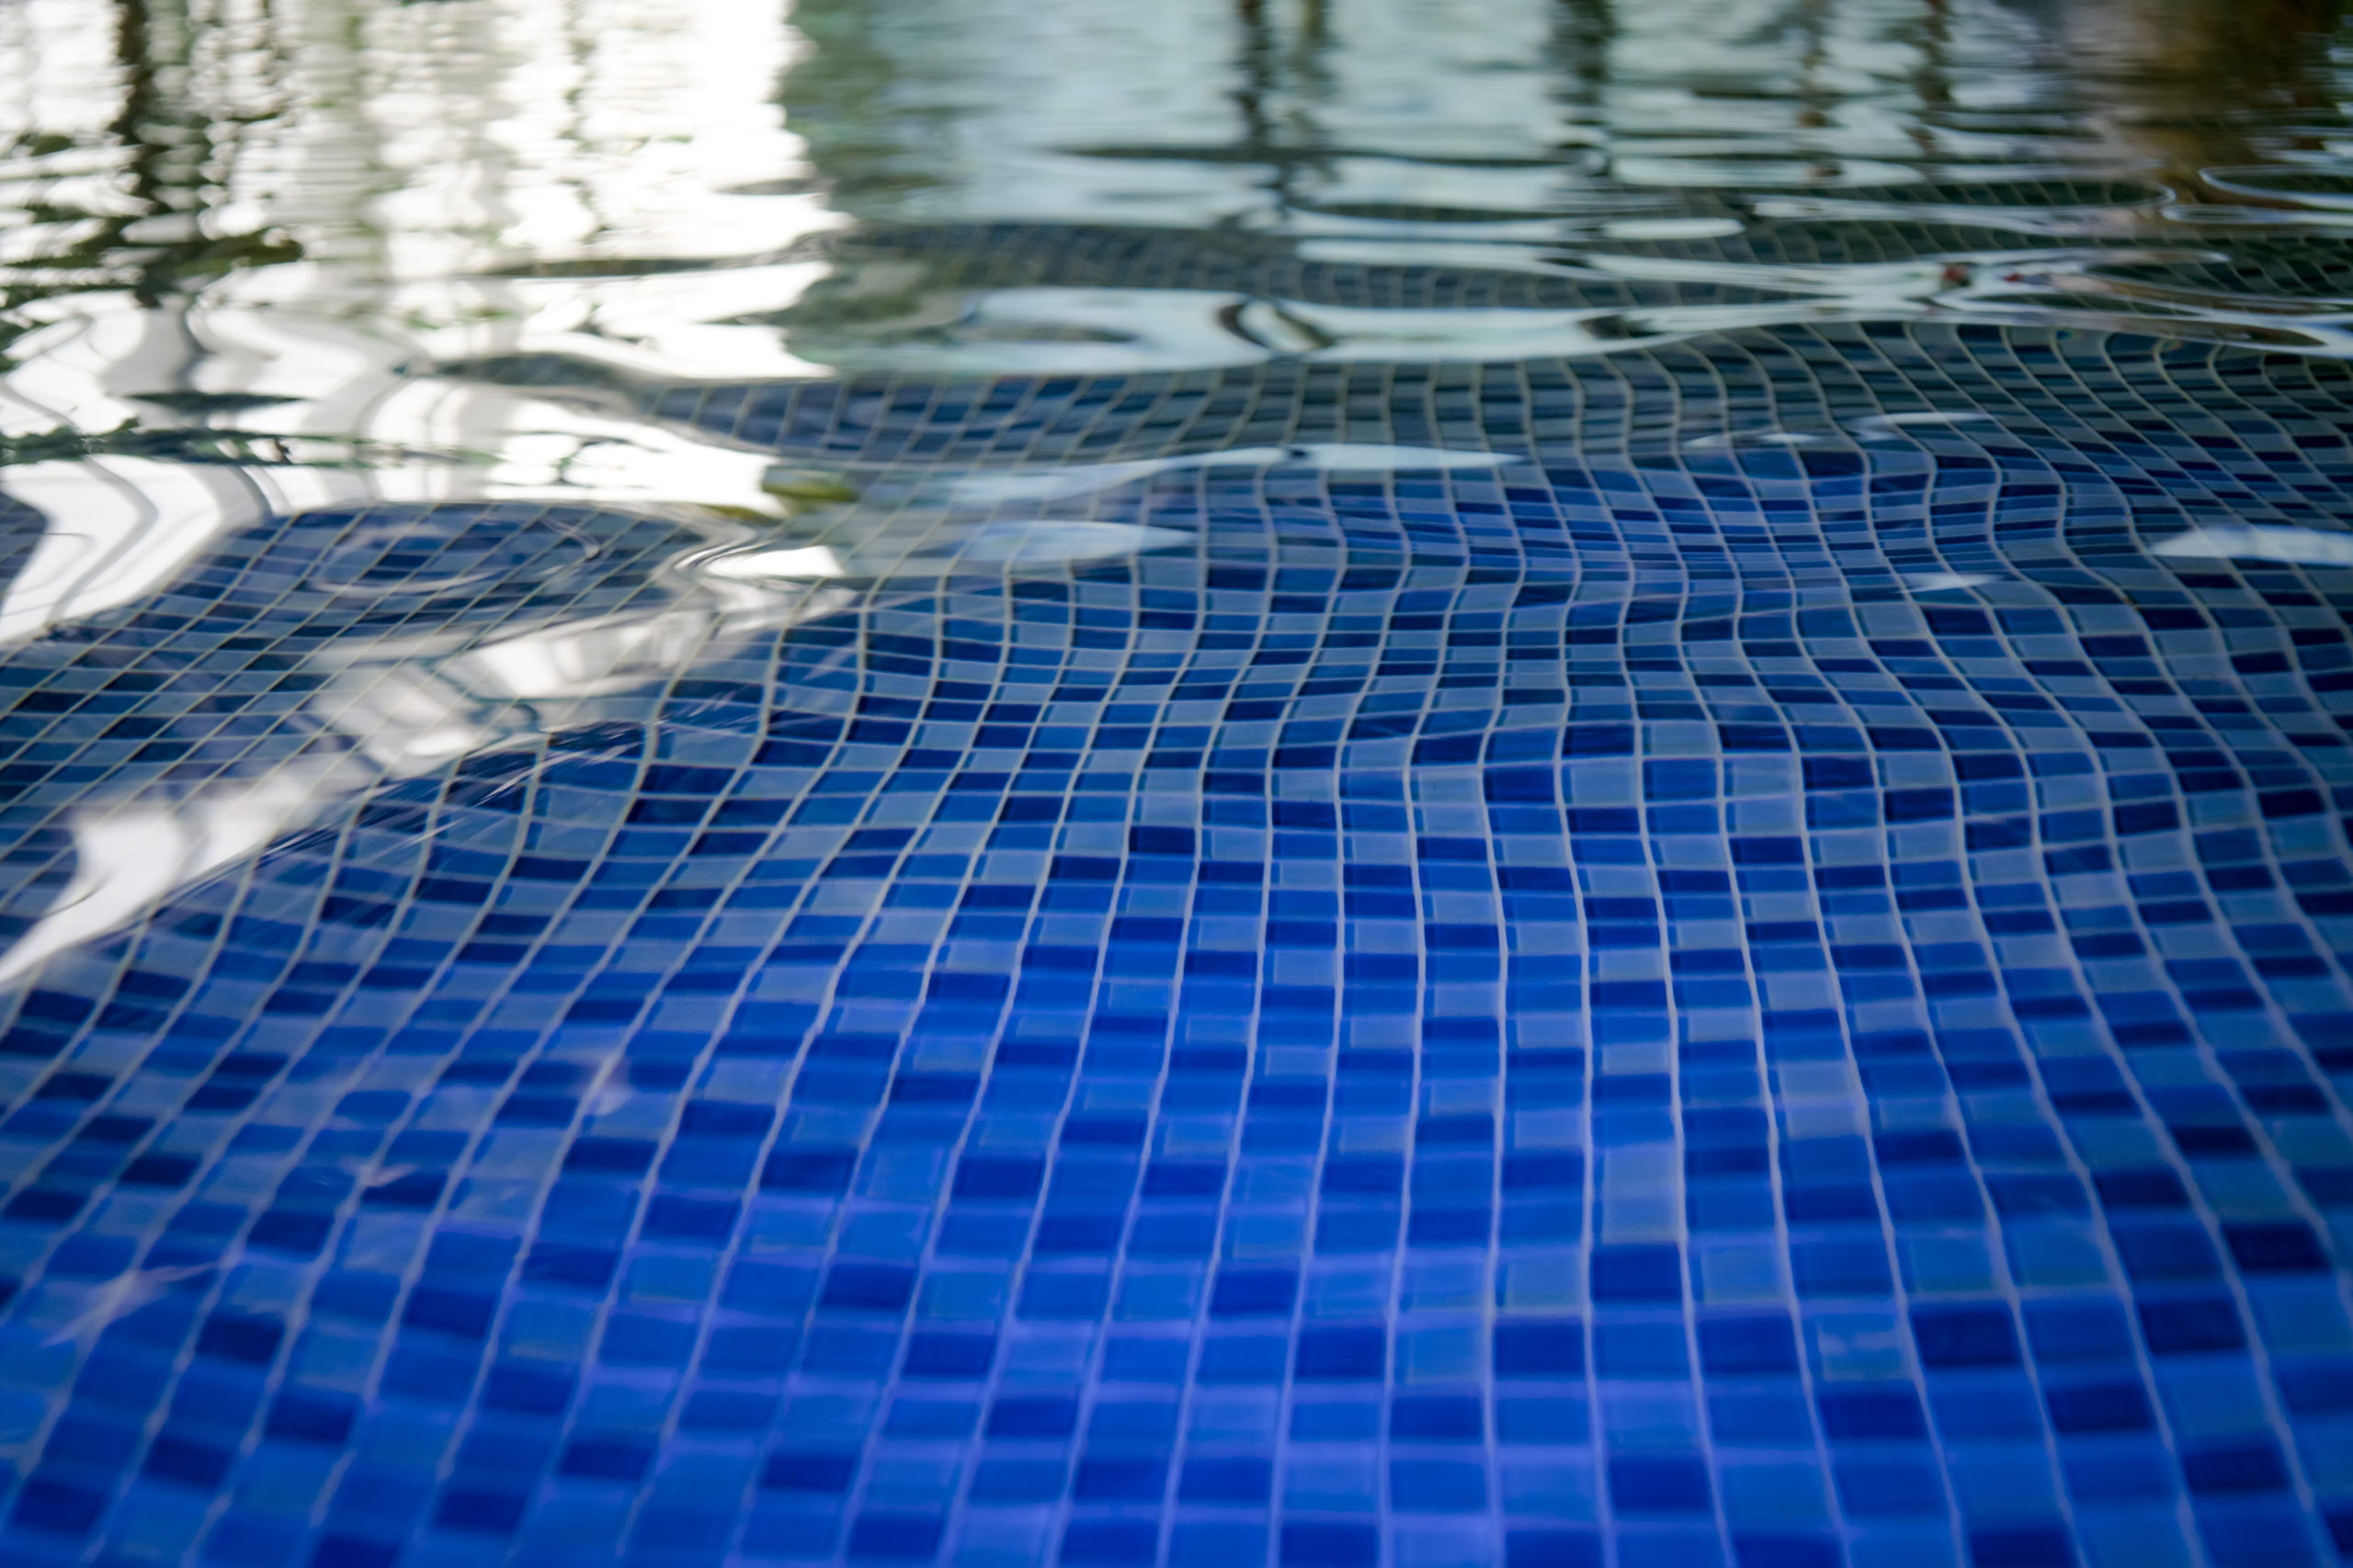 "Pool tiles reflecting the shimmering water, adding to the aesthetic appeal of the pool."